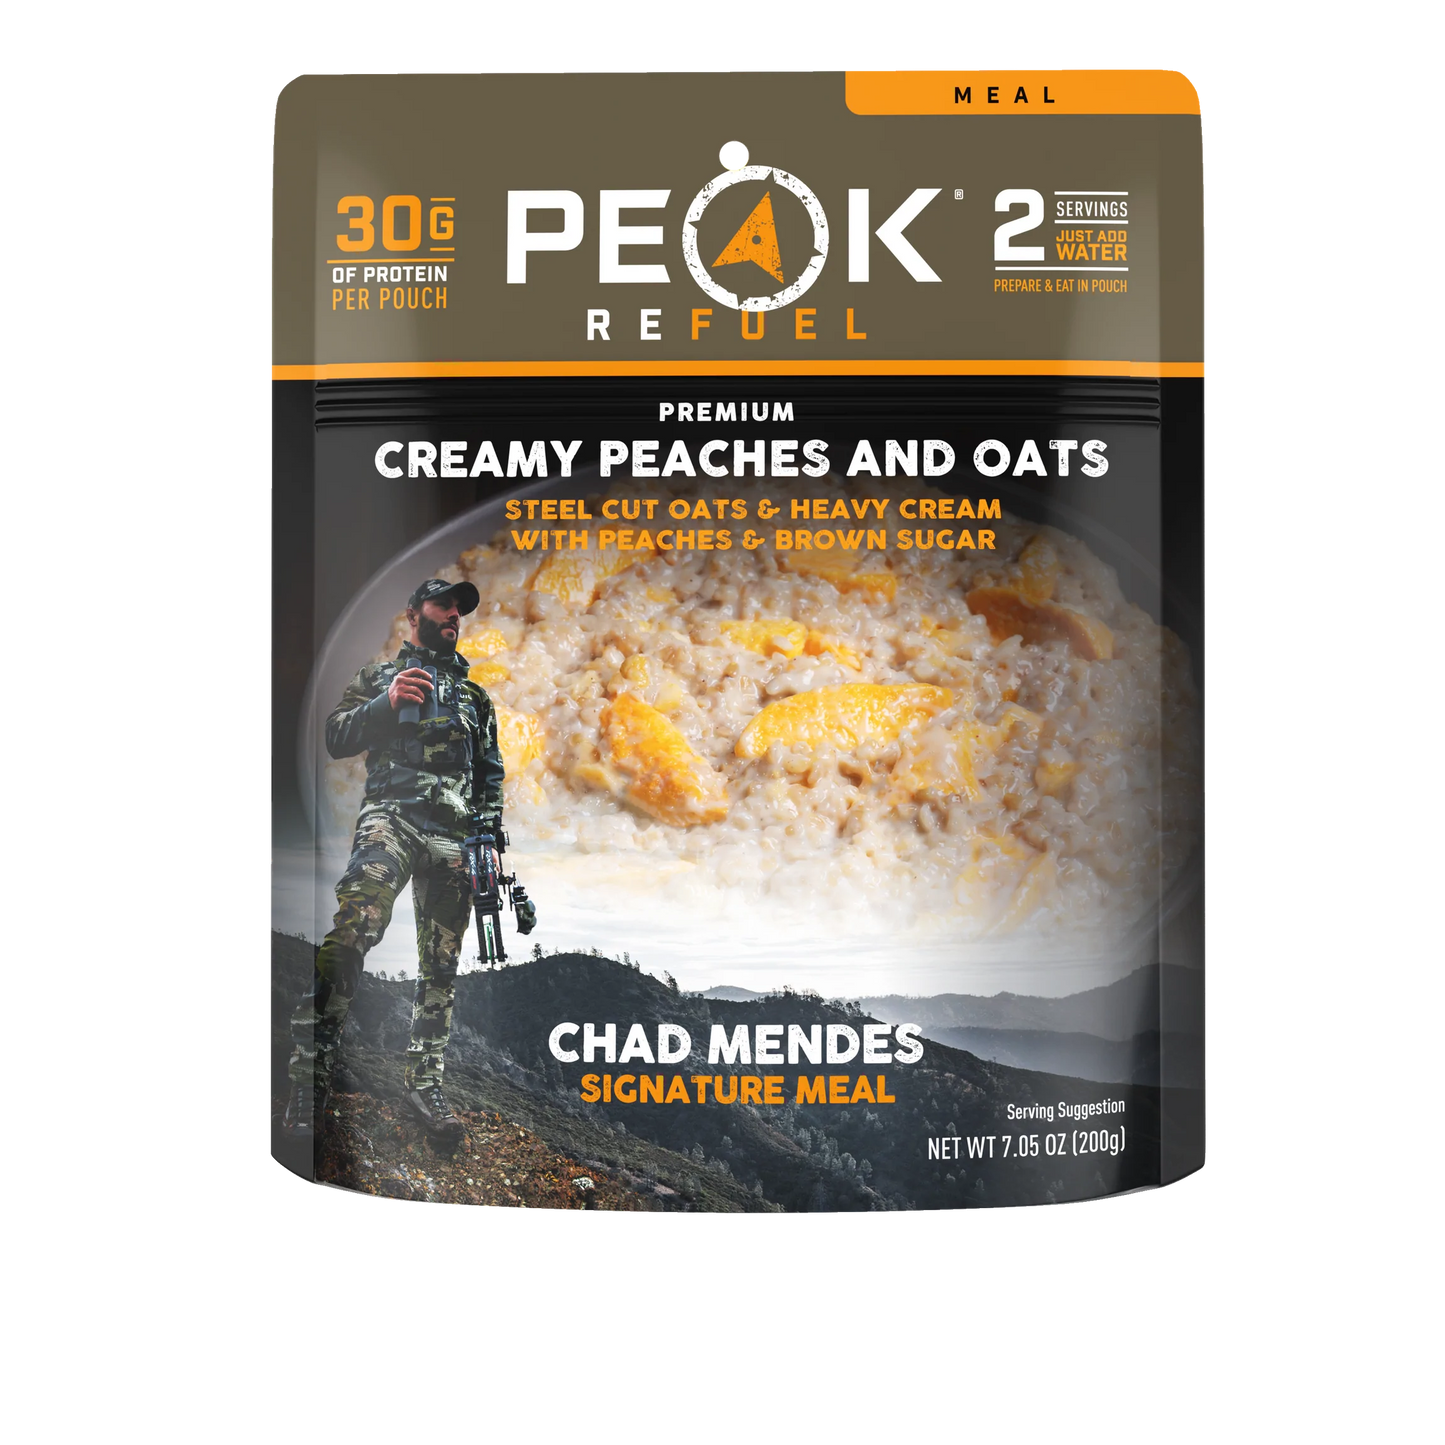 PEAK Creamy Peaches and Oats 7.05 Pouch BeReadyFoods.com